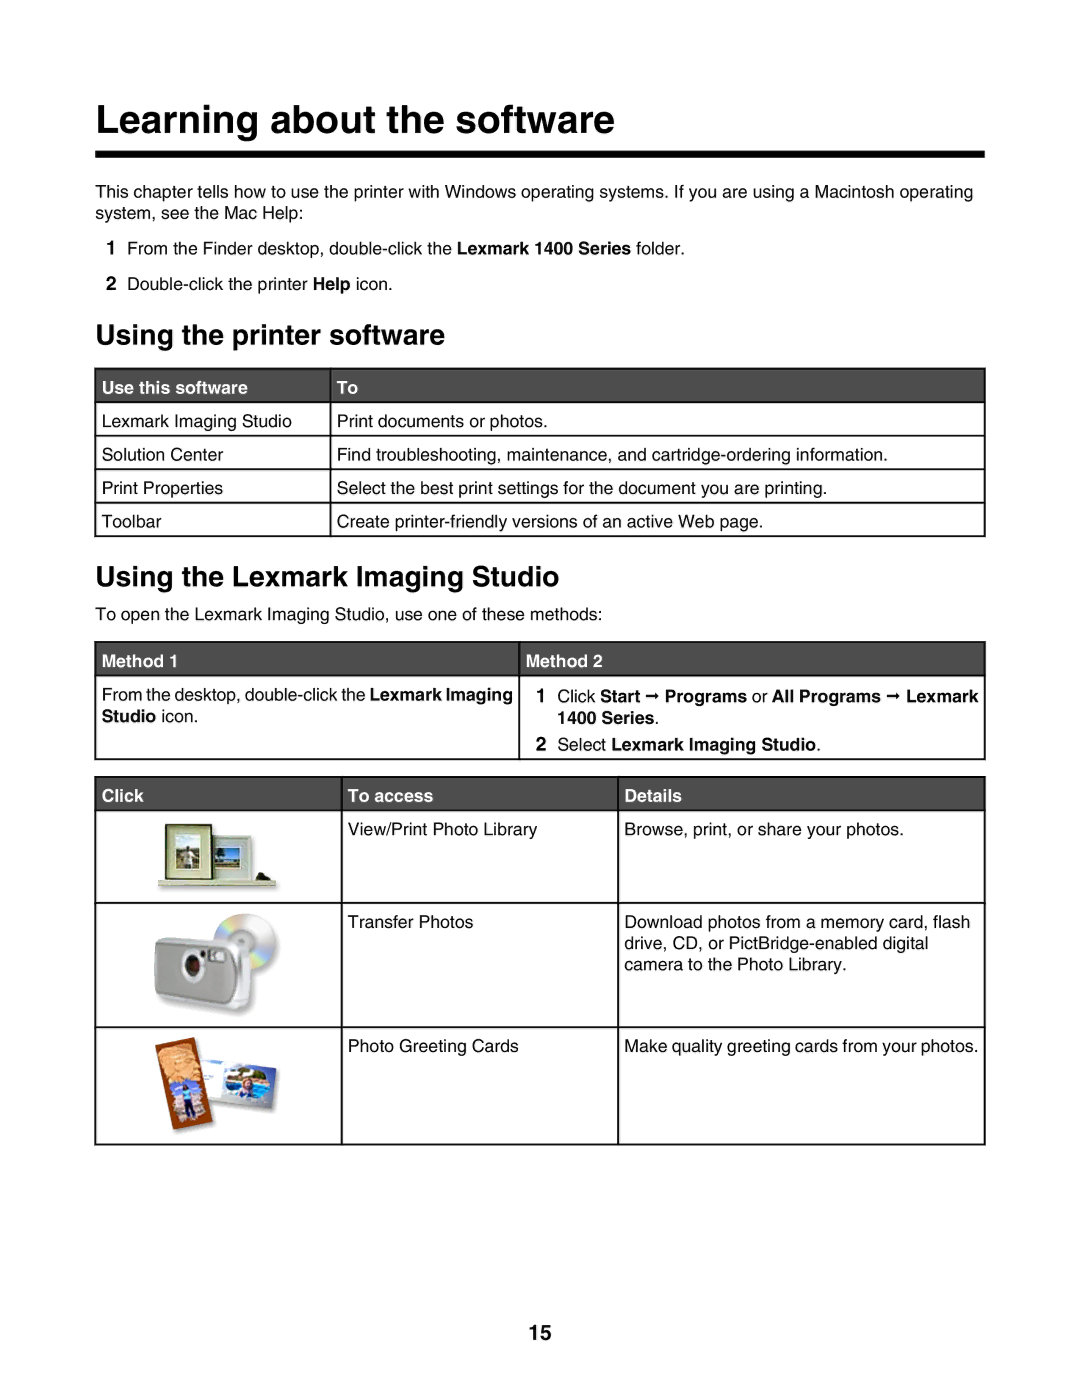 Lexmark 1400 Series manual Learning about the software, Using the printer software, Using the Lexmark Imaging Studio 